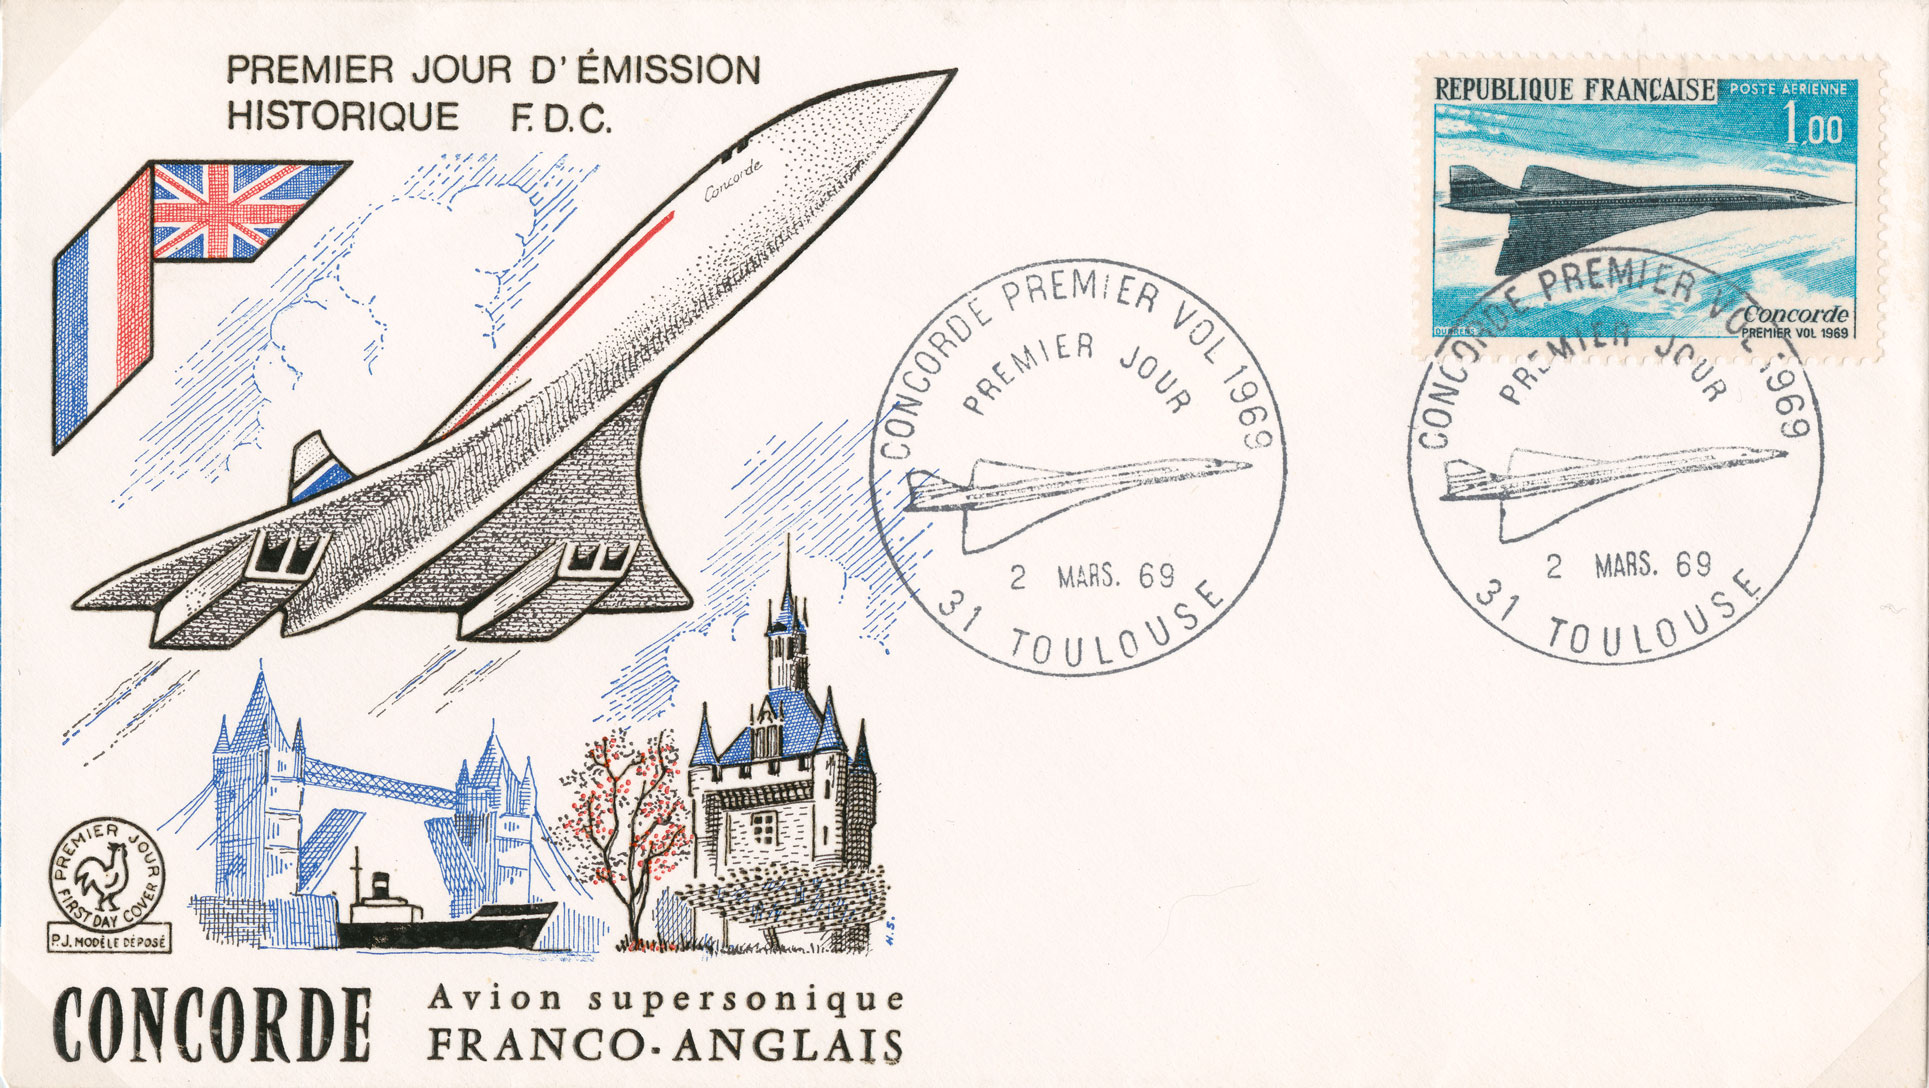 The French first day cover with an illustration of Concorde and the commemorative stamp marking the first flight.